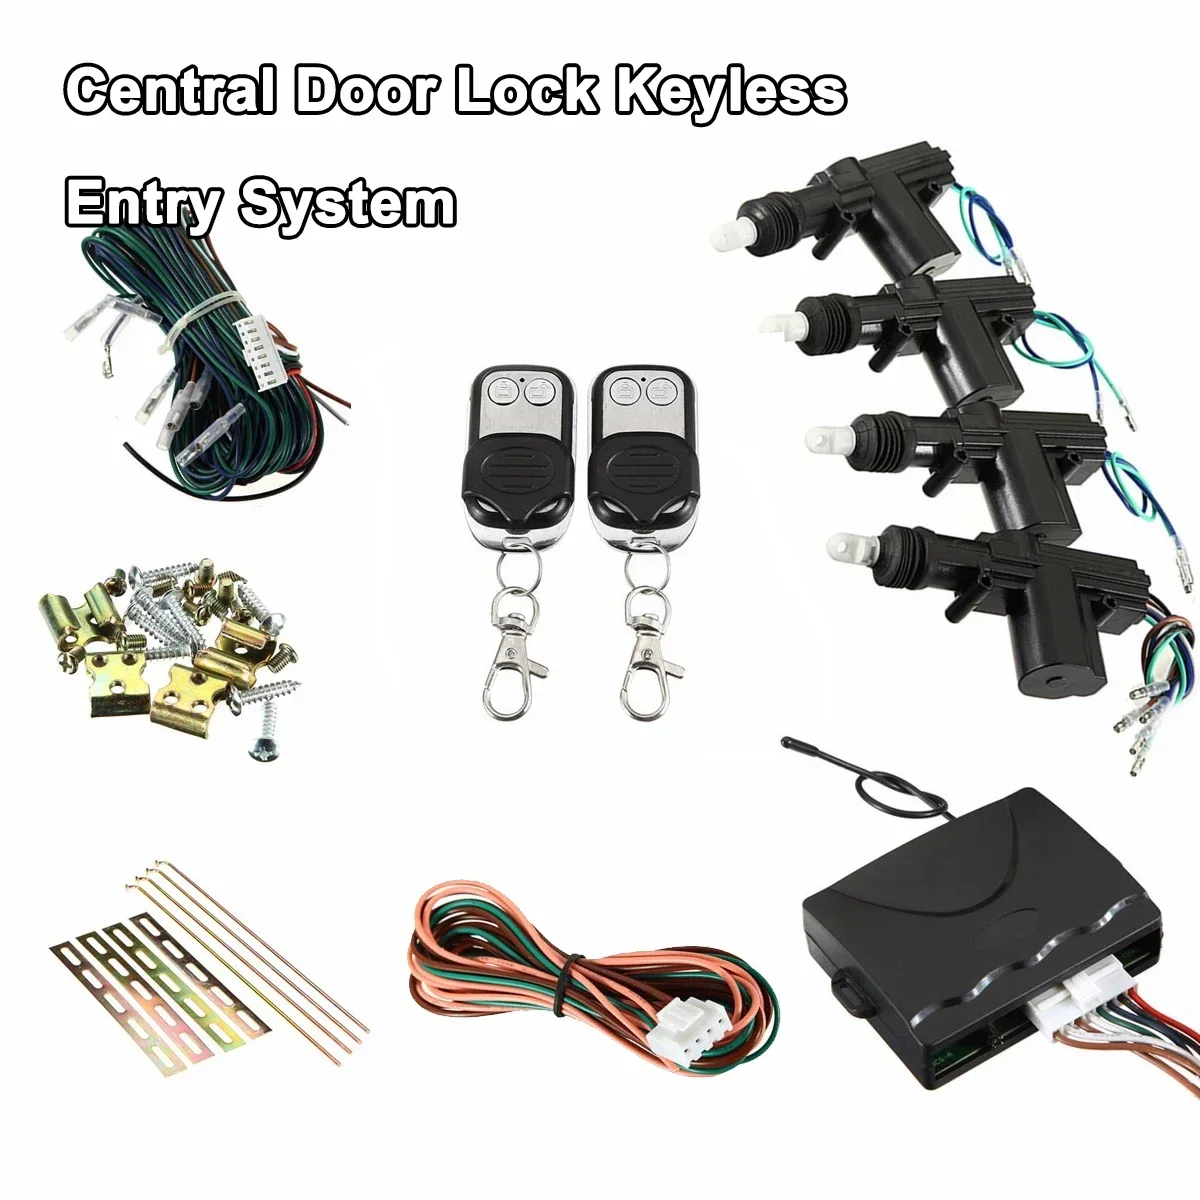 

Universal 2/4 Door Remote Keyless Entry Central Locking Kit Car Remote Central Kit Door Lock Keyless Entry System